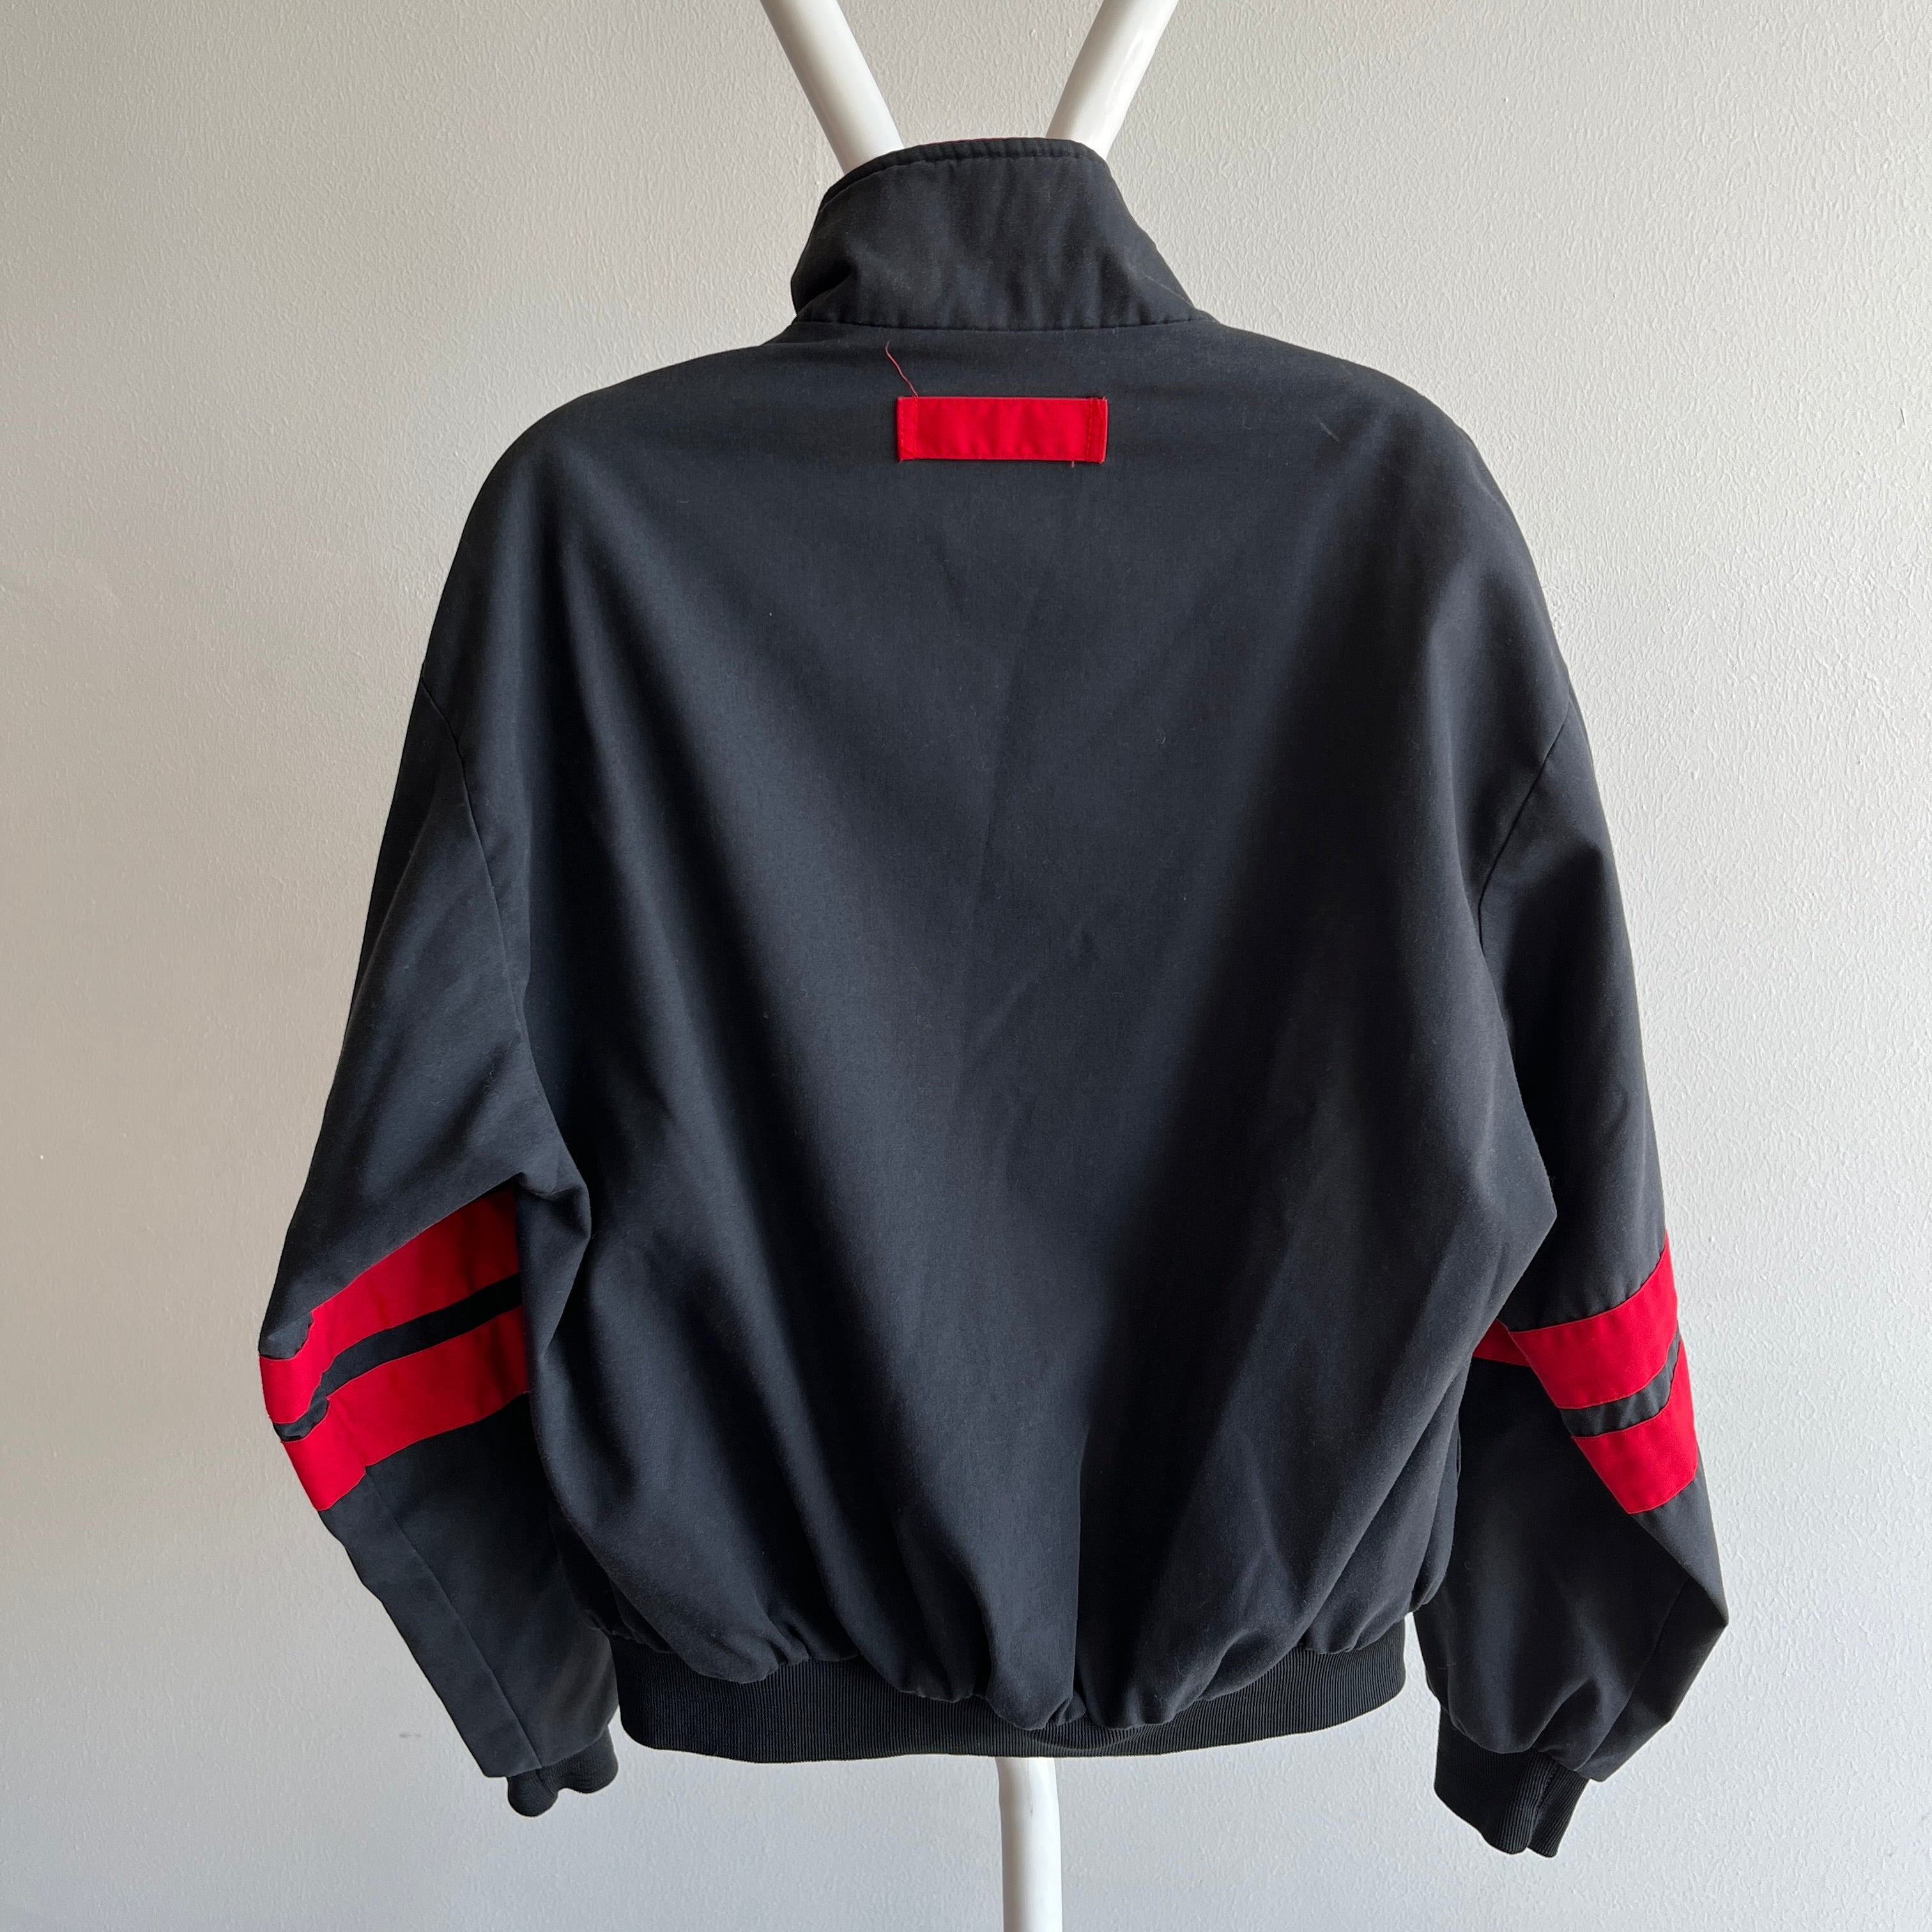 1980/90s Winston Racing Zip Up Jacket with Double Stripes